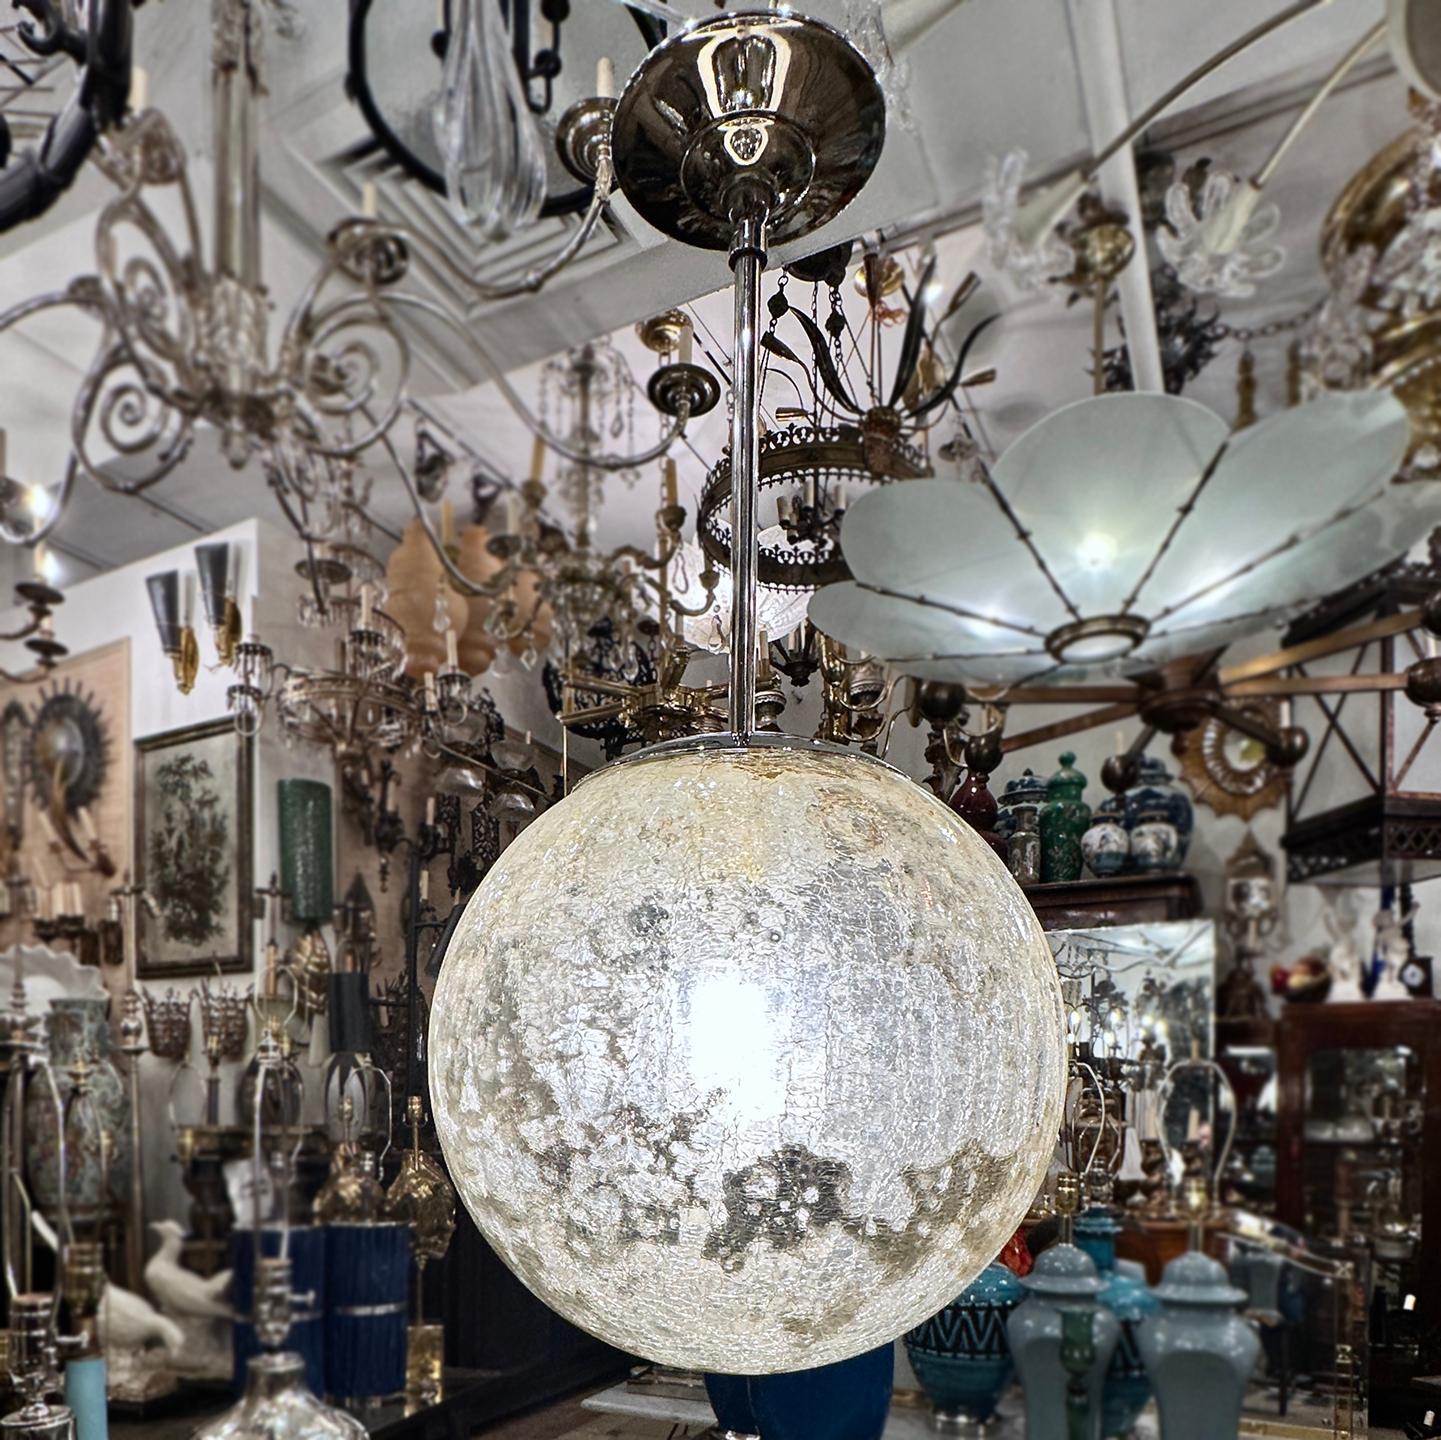 A circa 1960's Italian crackled and mirrored globe light fixture.

Measurements:
Current drop: 22